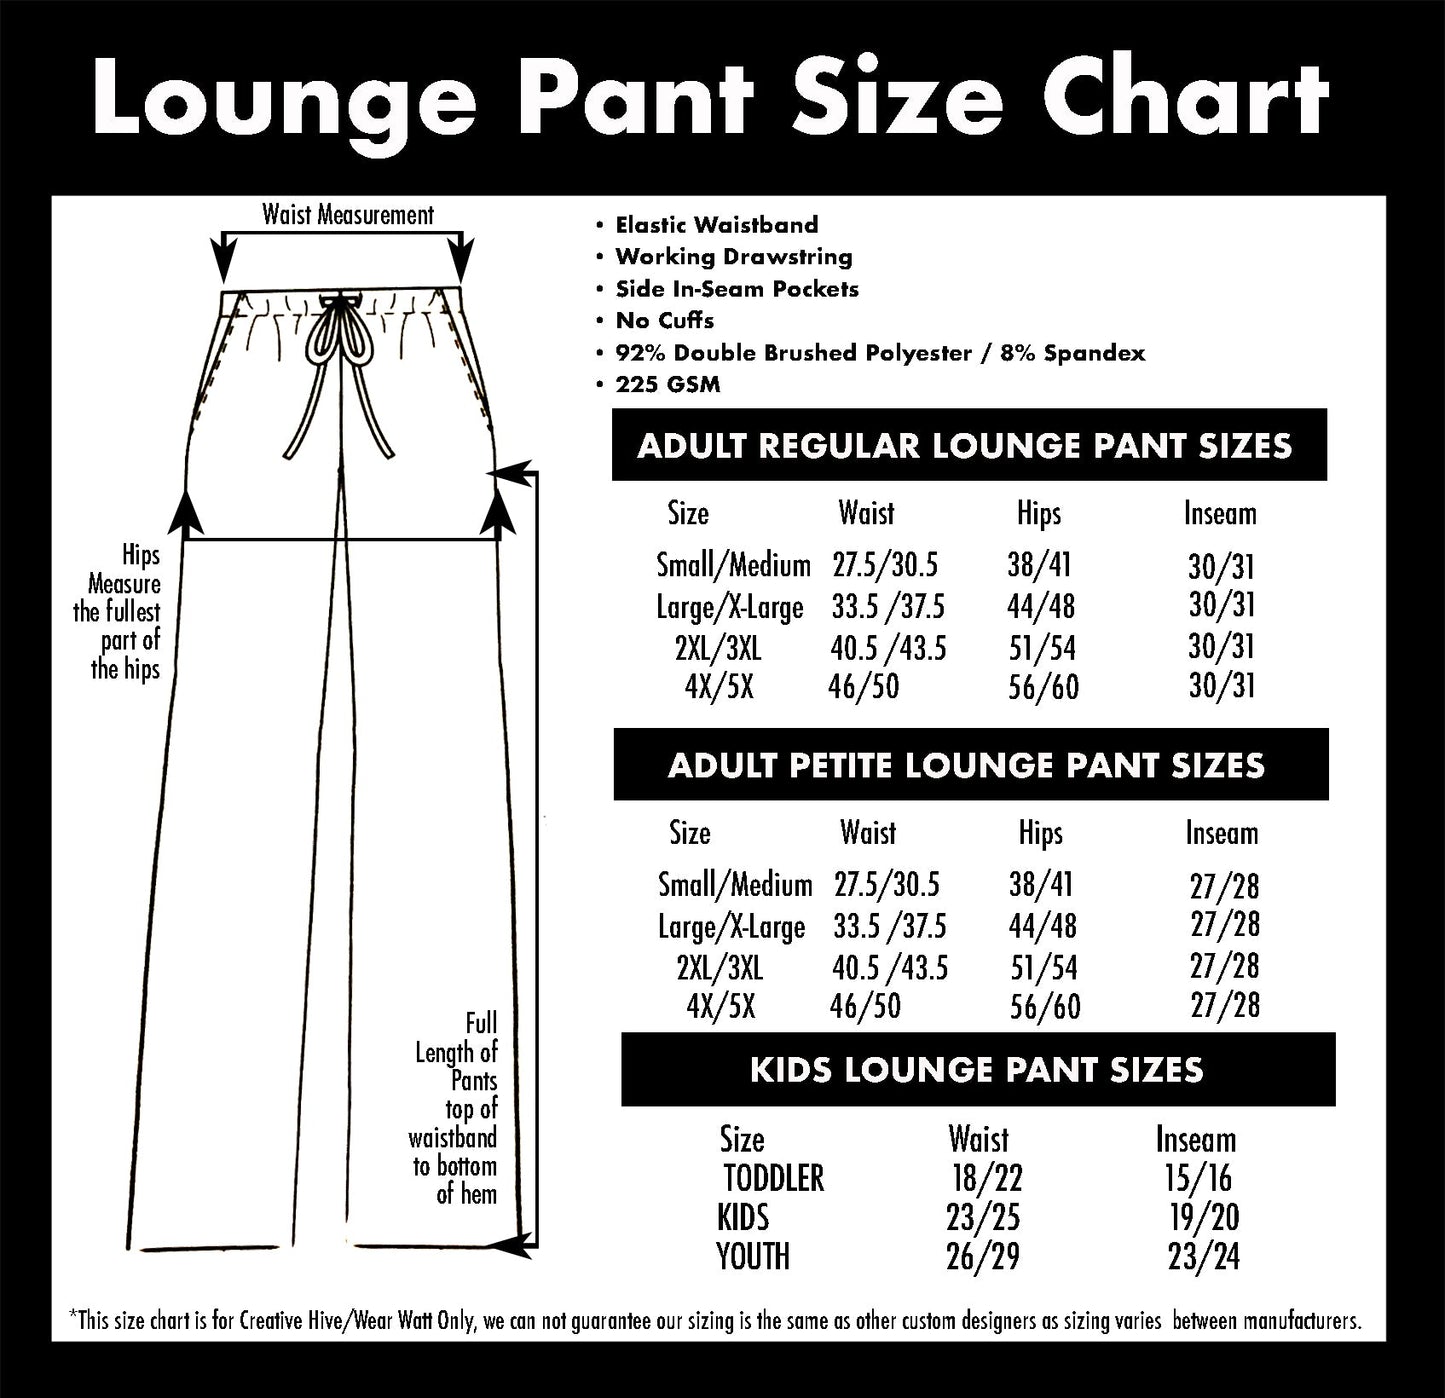 You Hear It First - Lounge Pants